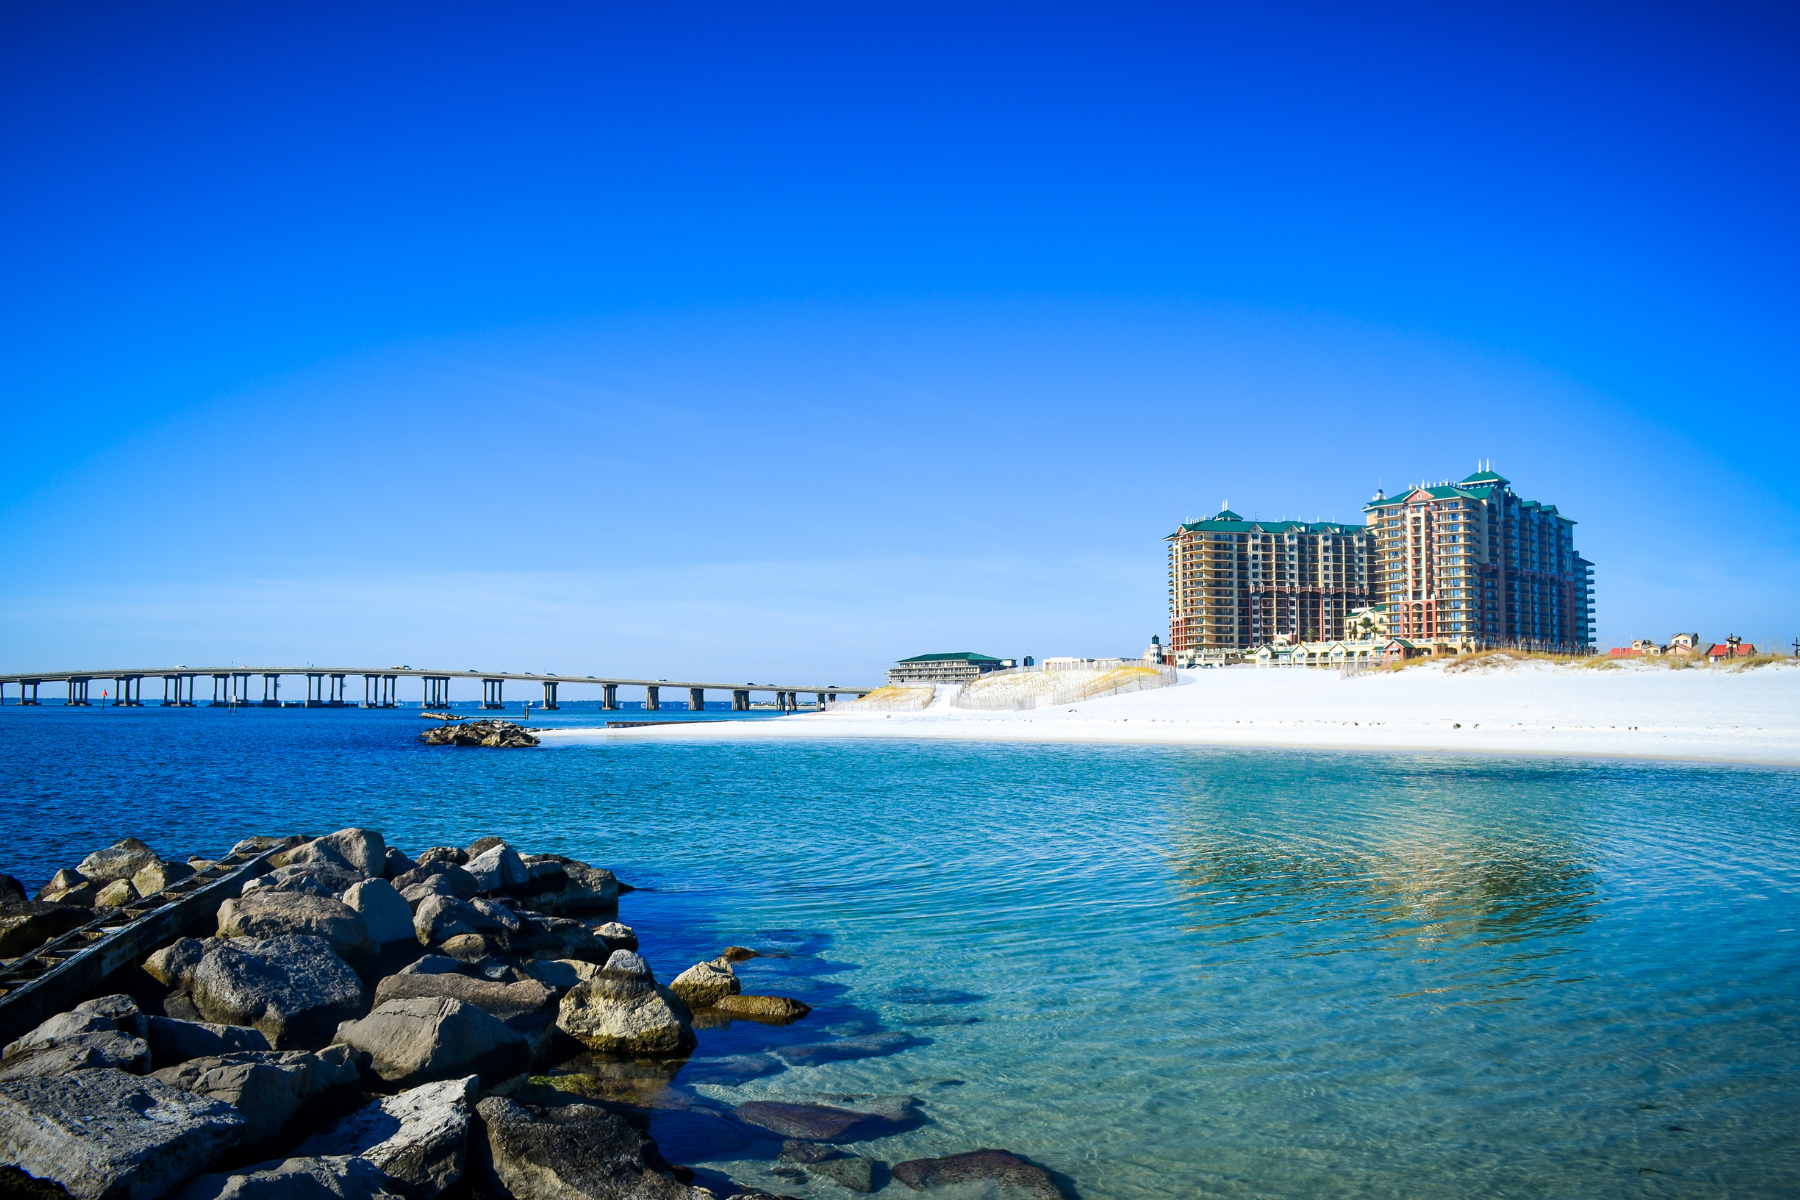 Bridge in Destin surrounded by beaches and ocean